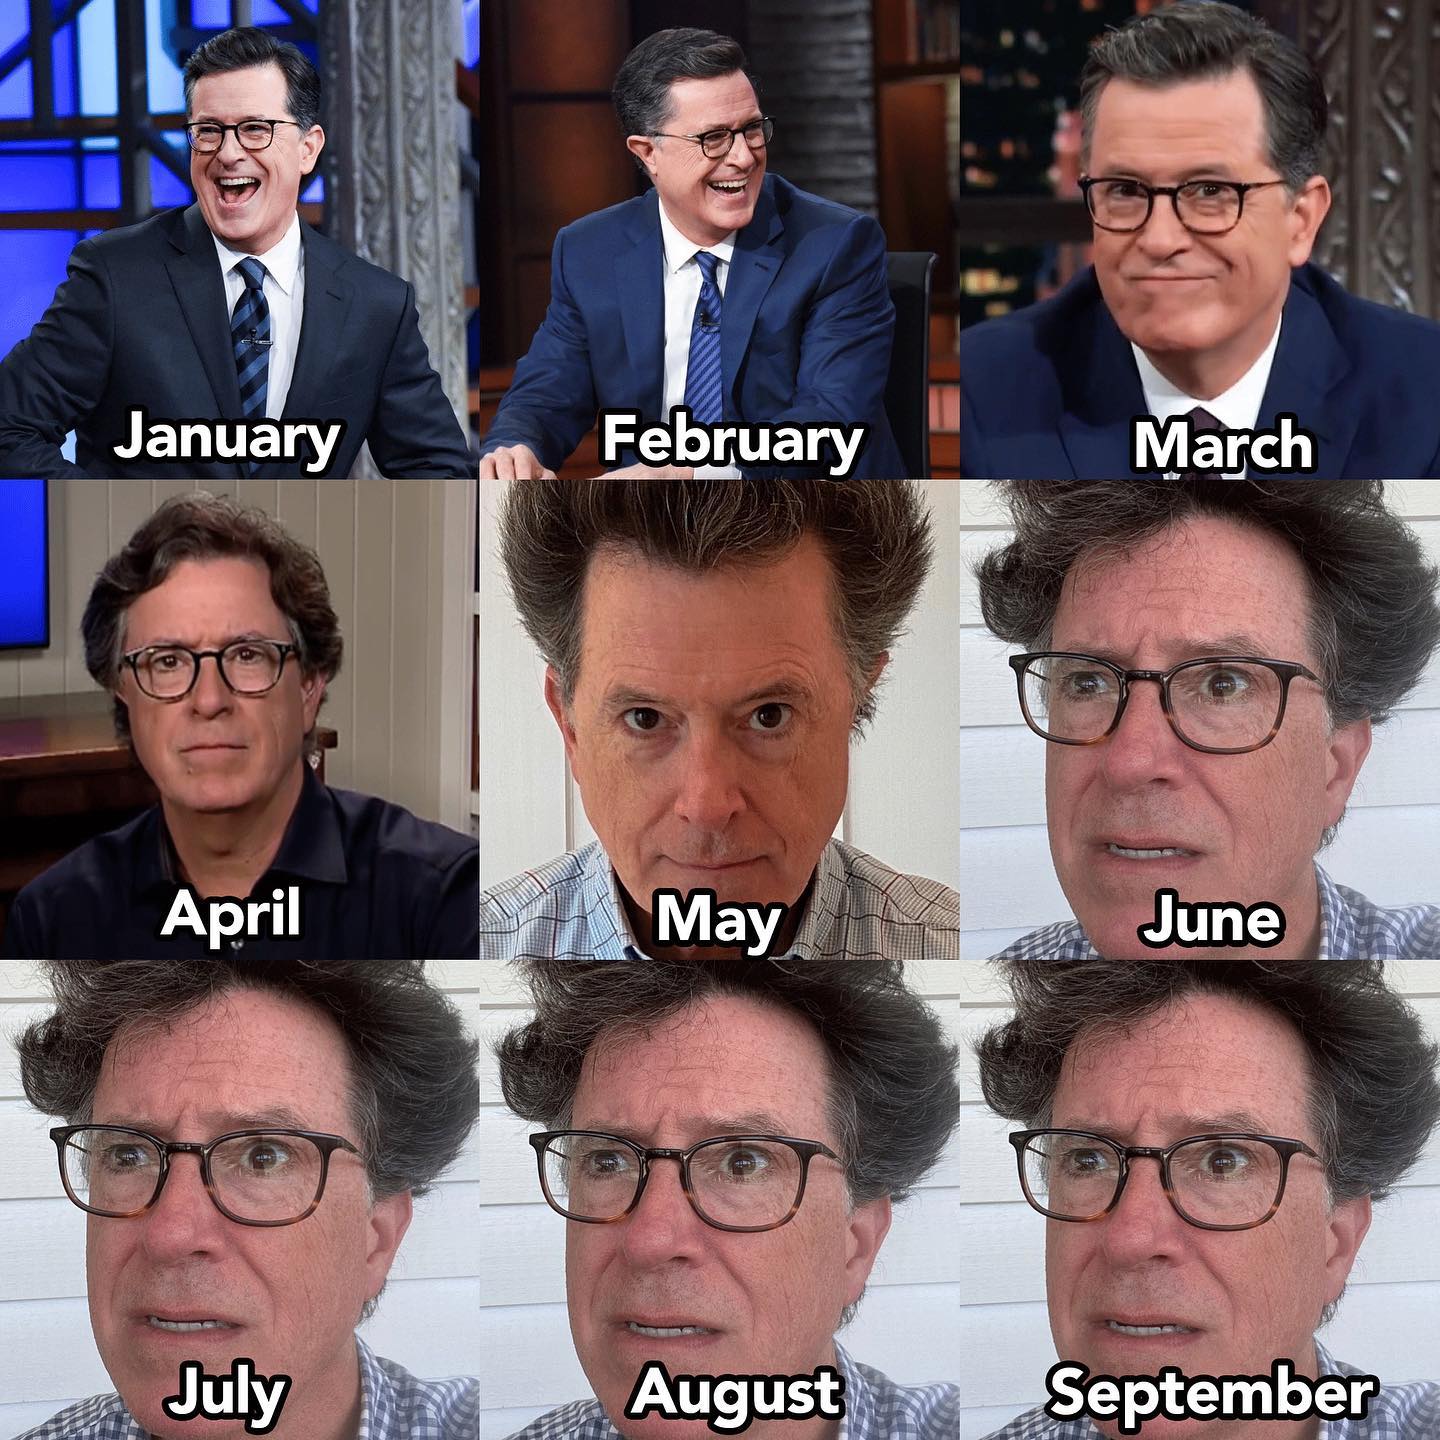 2020 challenge - reese witherspoon -glasses - January February March April May June July August September